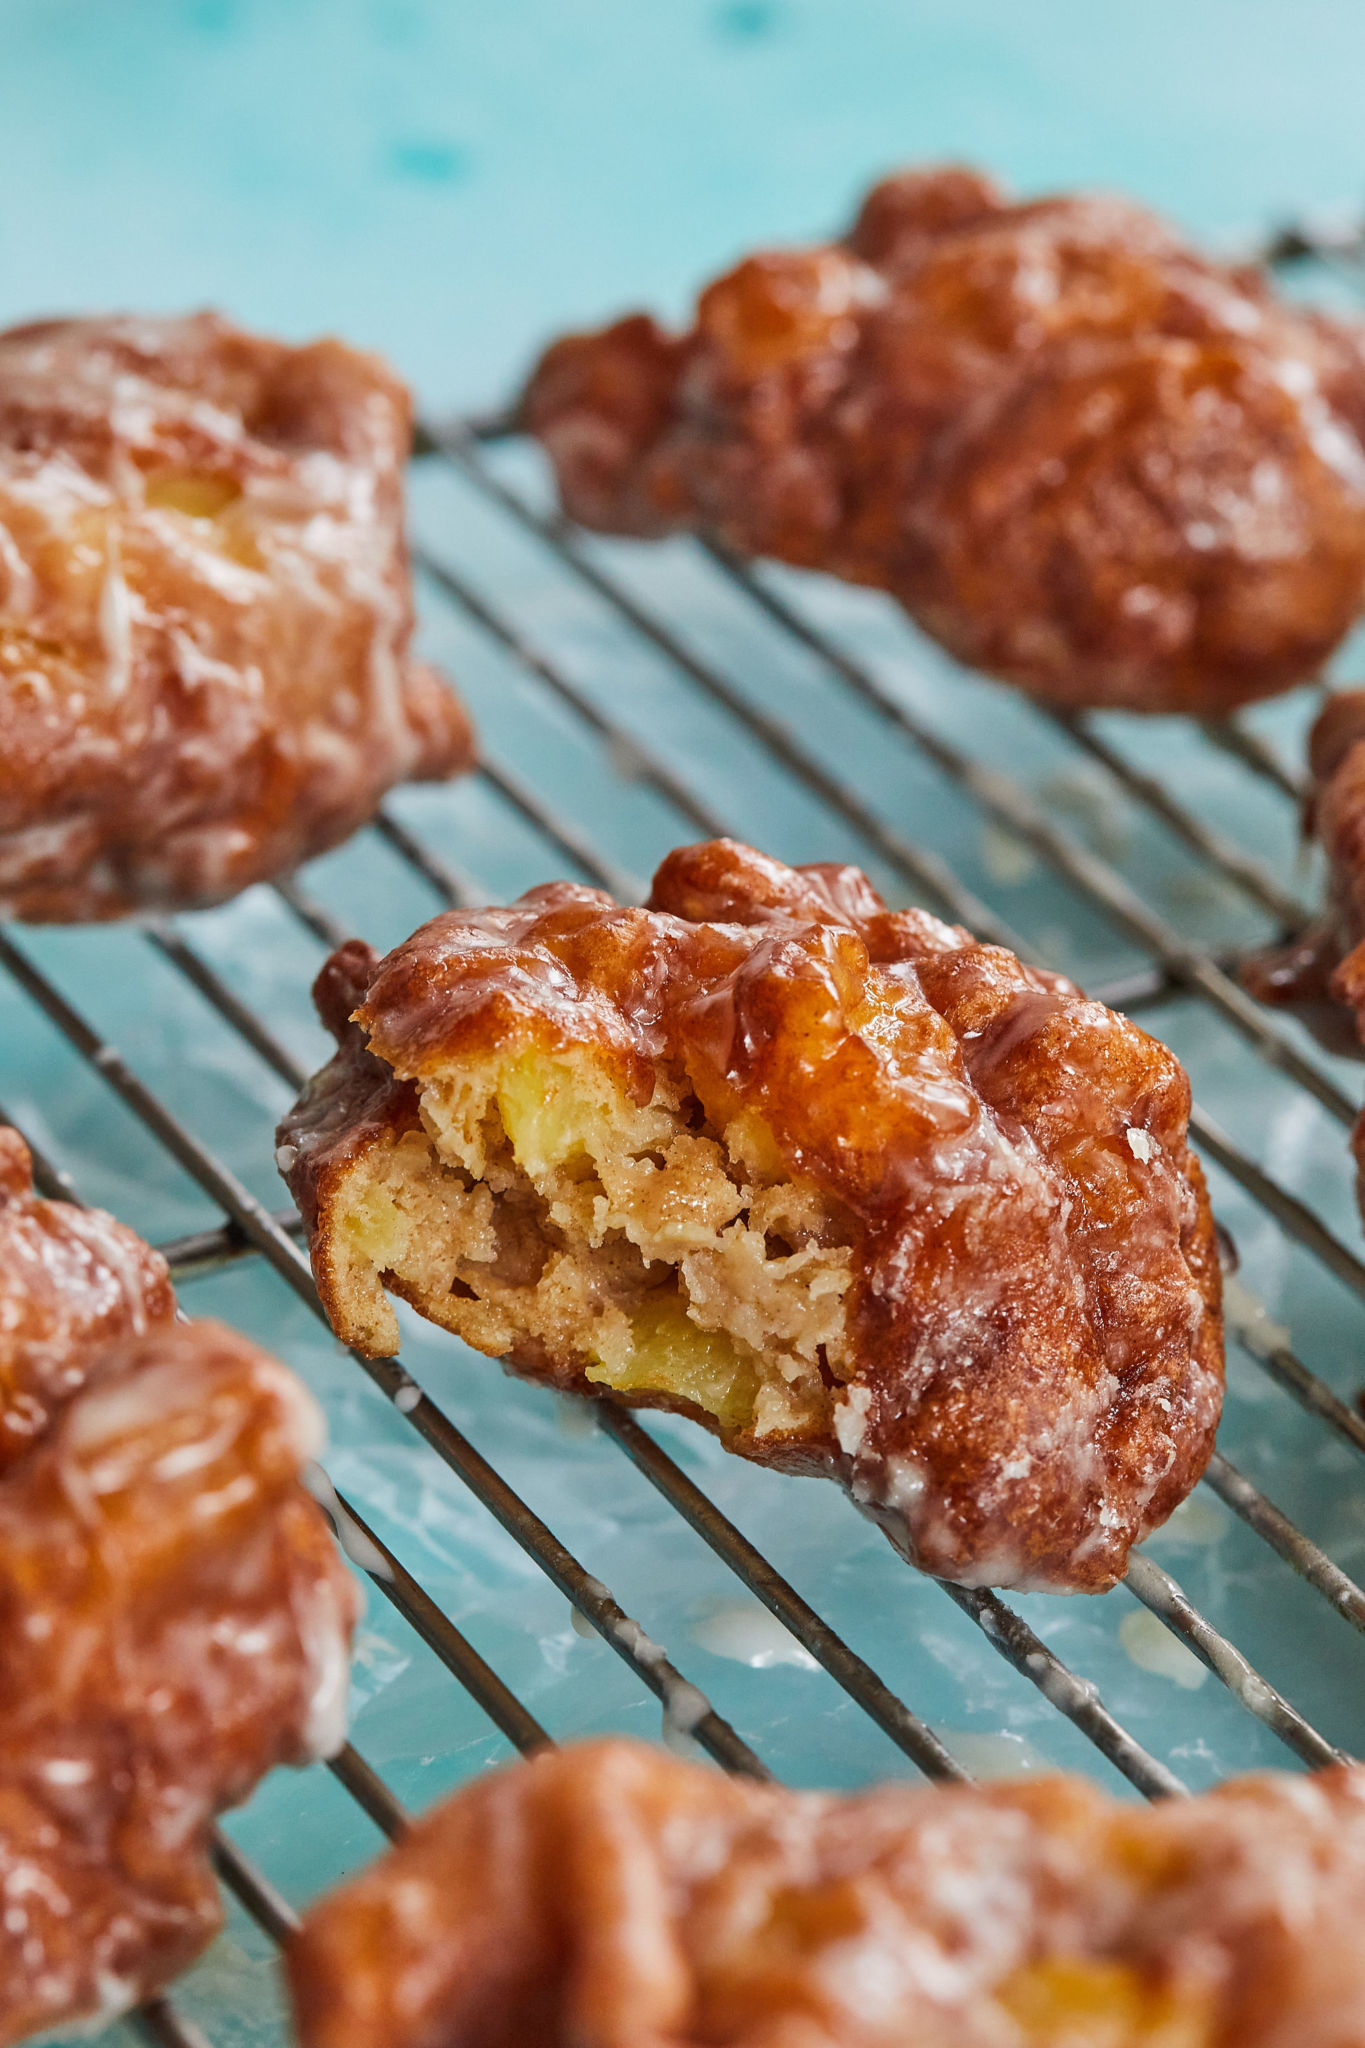 Apple Fritters Better Than Your Granny Used To Make